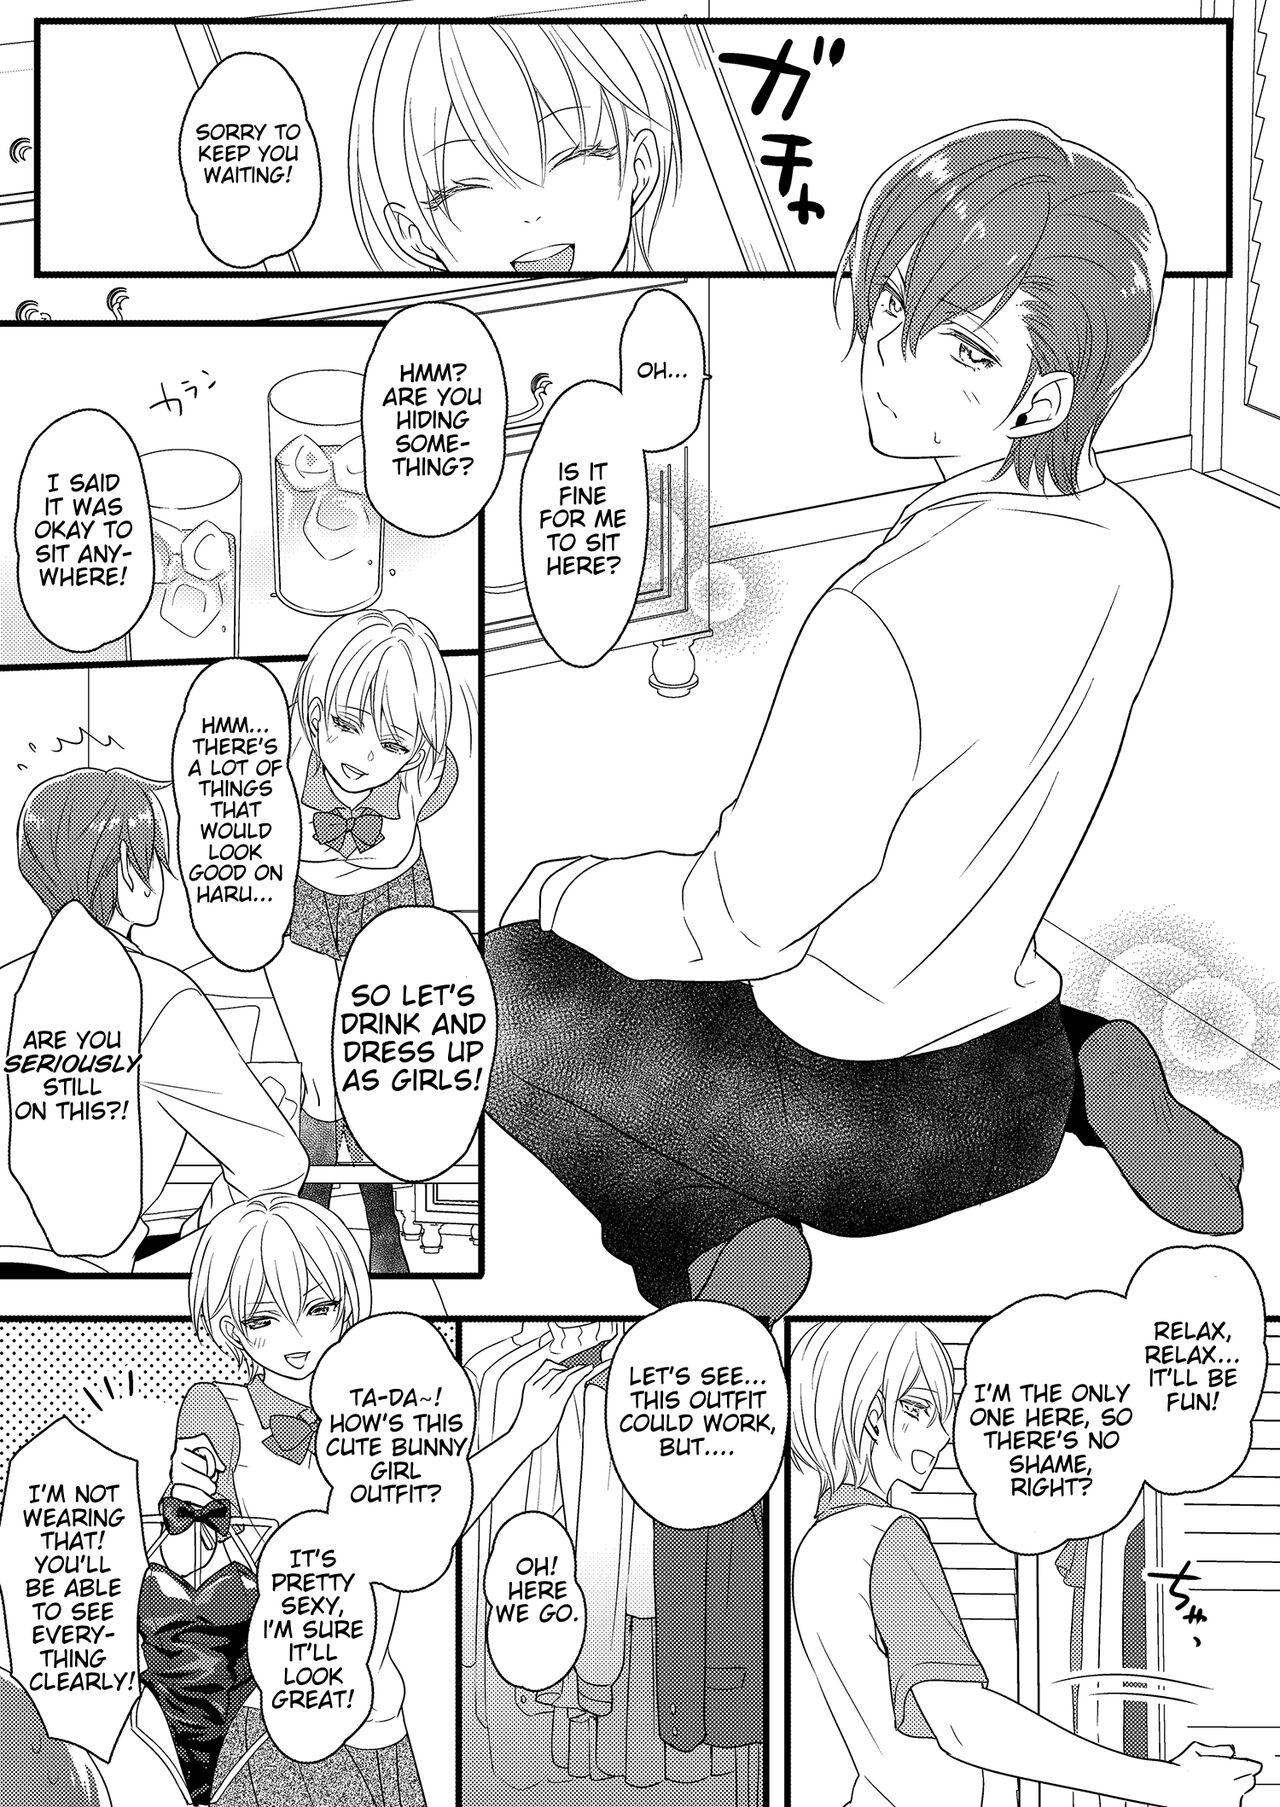 Perverted Haru and Sana ～Love Connected Through Cosplay～ - Original Culo - Page 11